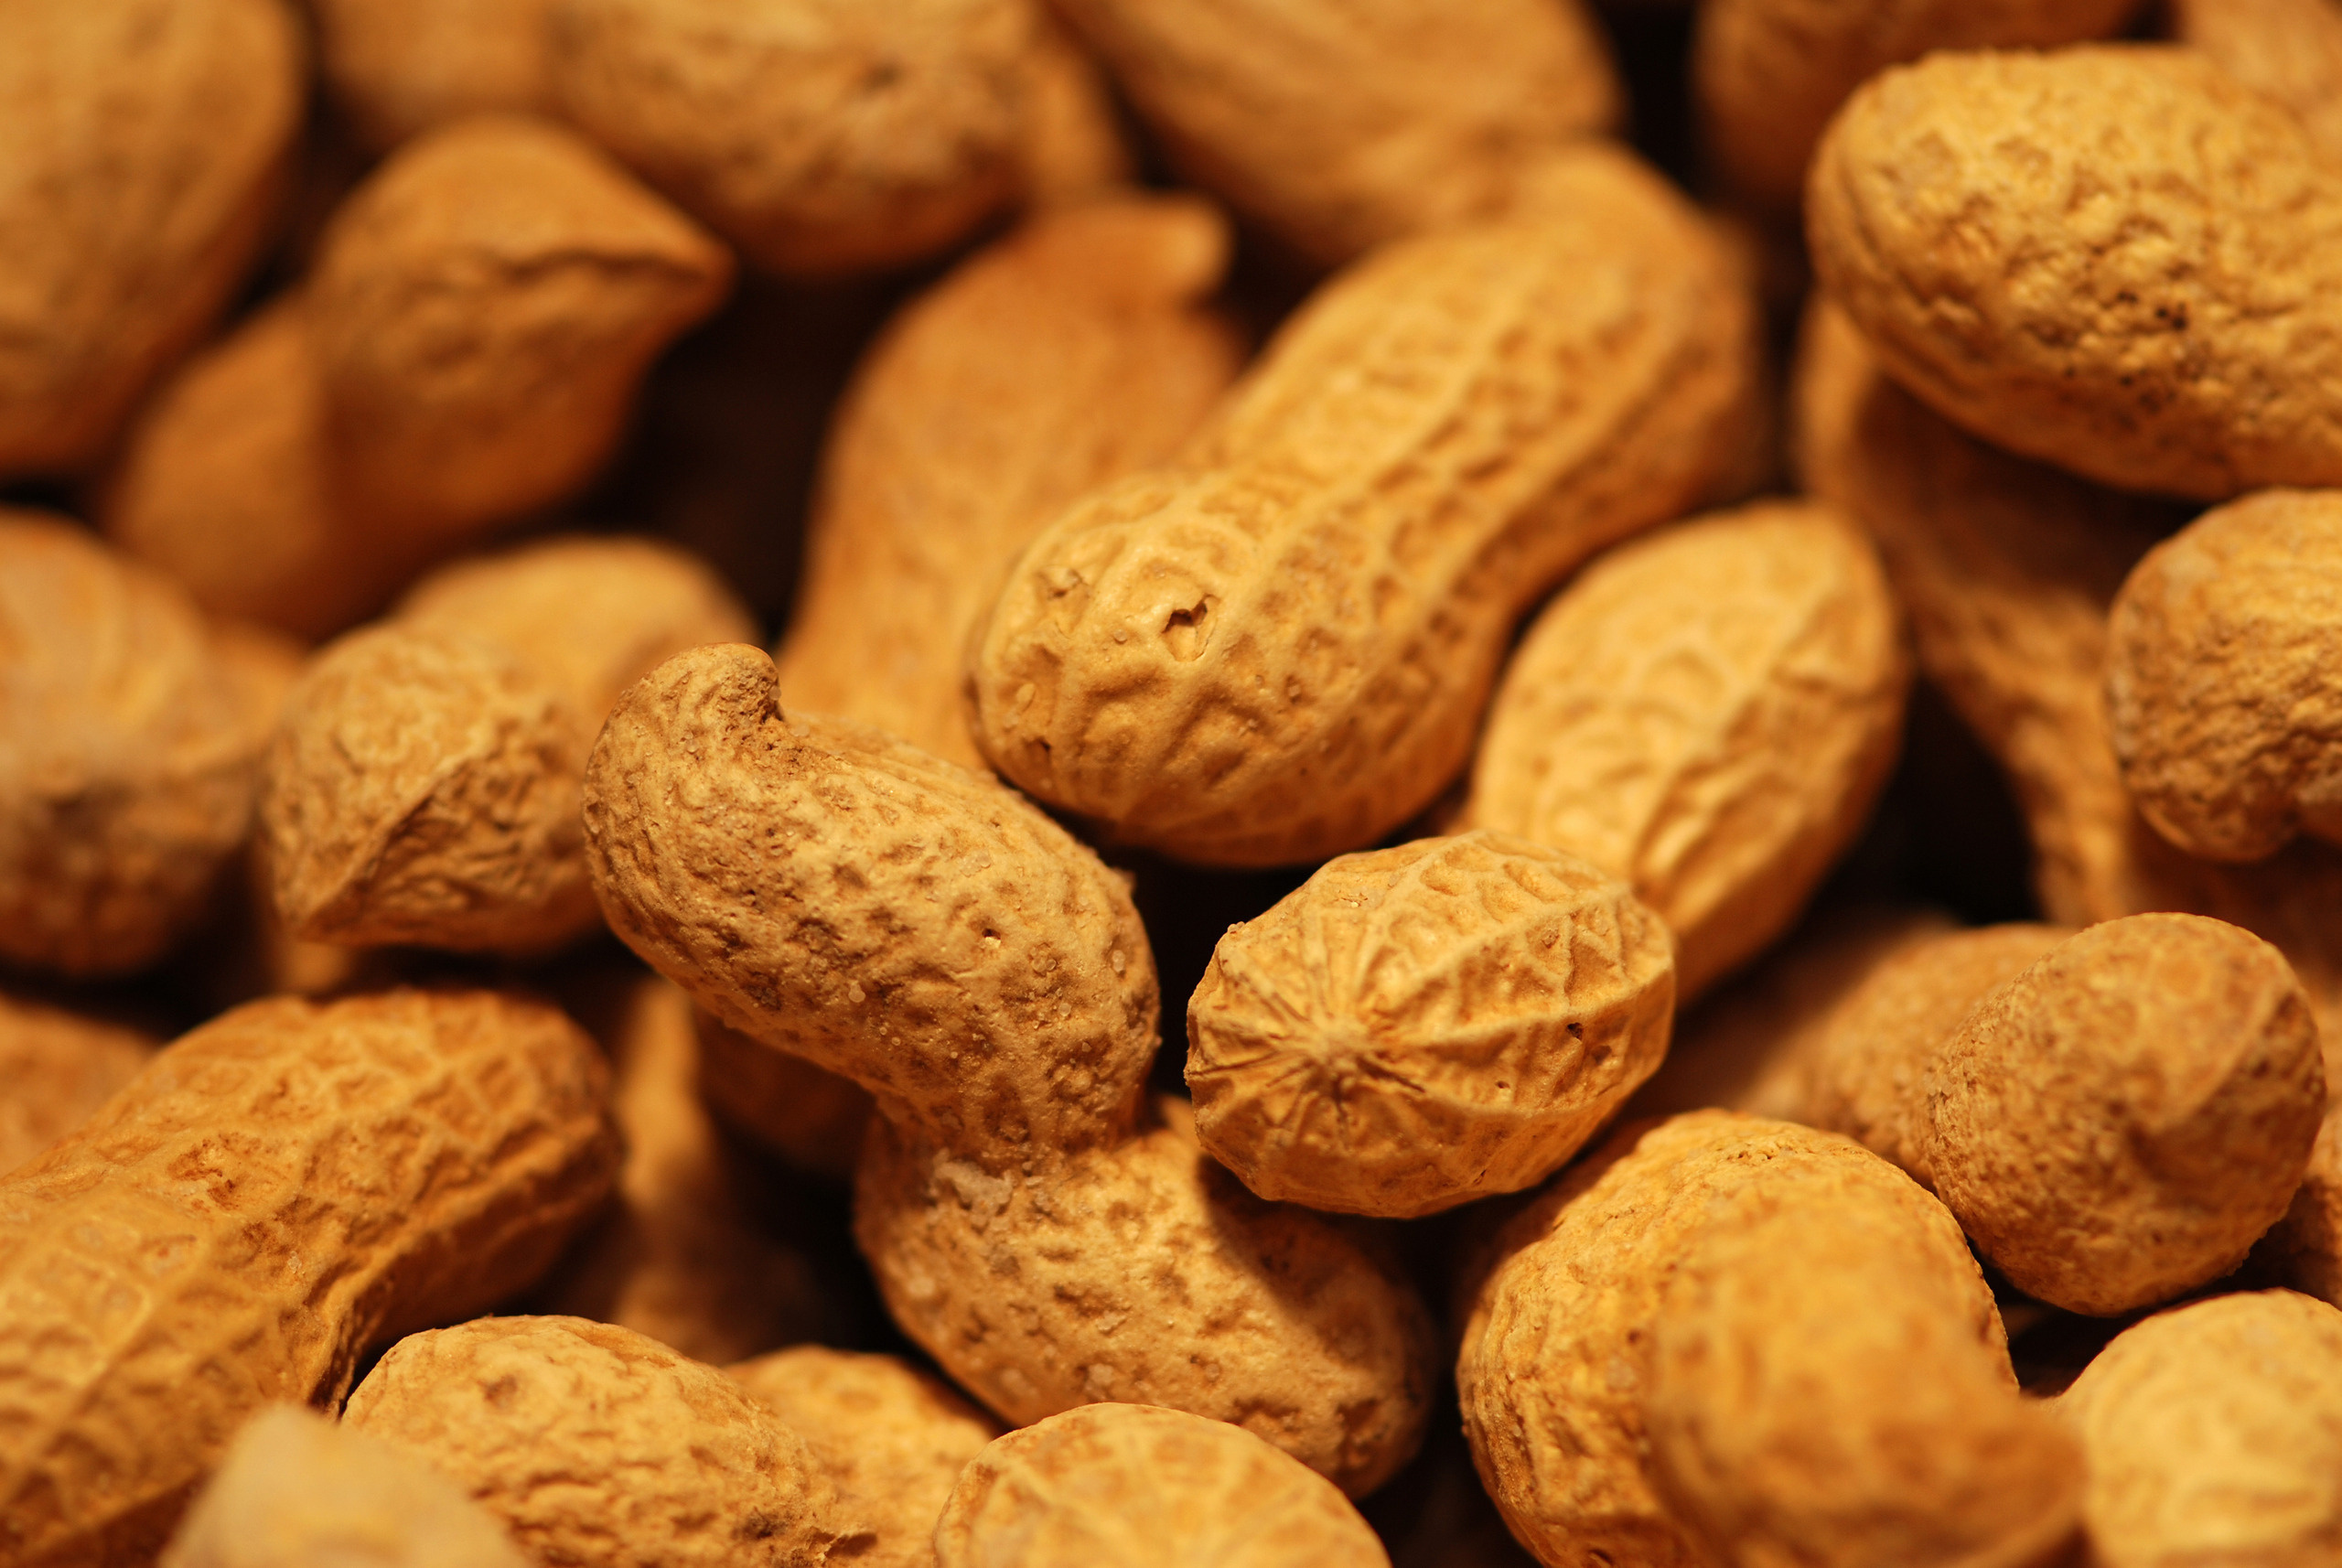 HD wallpaper, Crunchy Snack, Assorted Nuts, Desktop Hd Peanuts Wallpaper Photo, 2560X1720 Hd Desktop